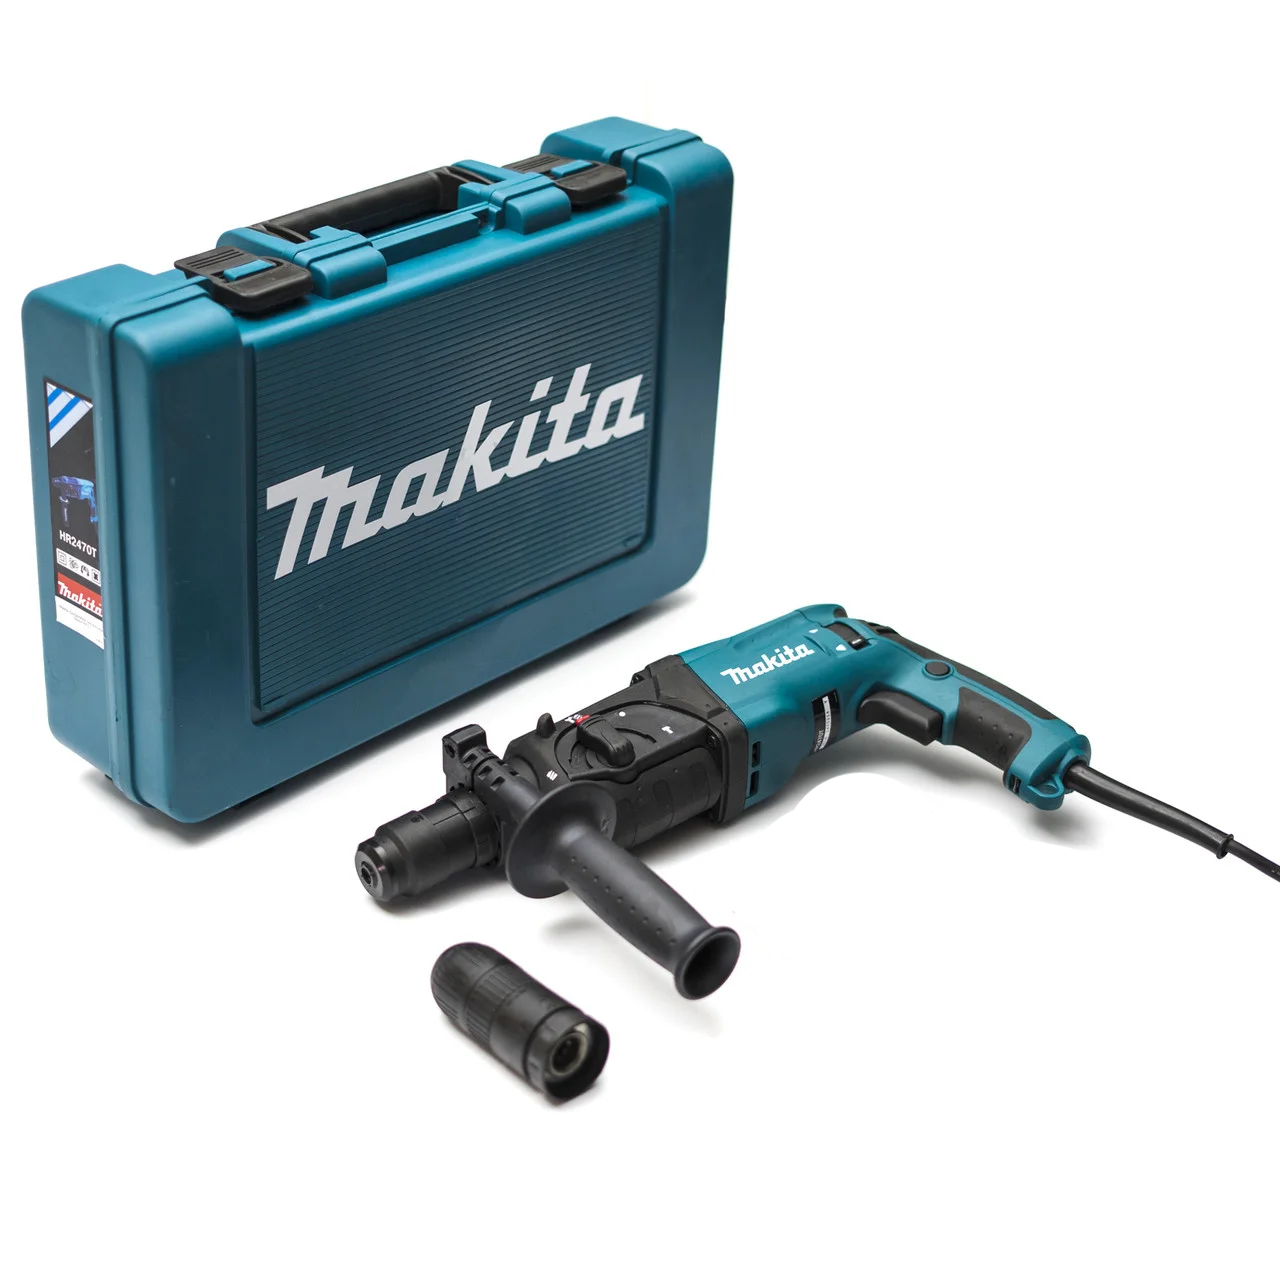 Makita Rotary Hammer Drill HR2470T Power Tool Services